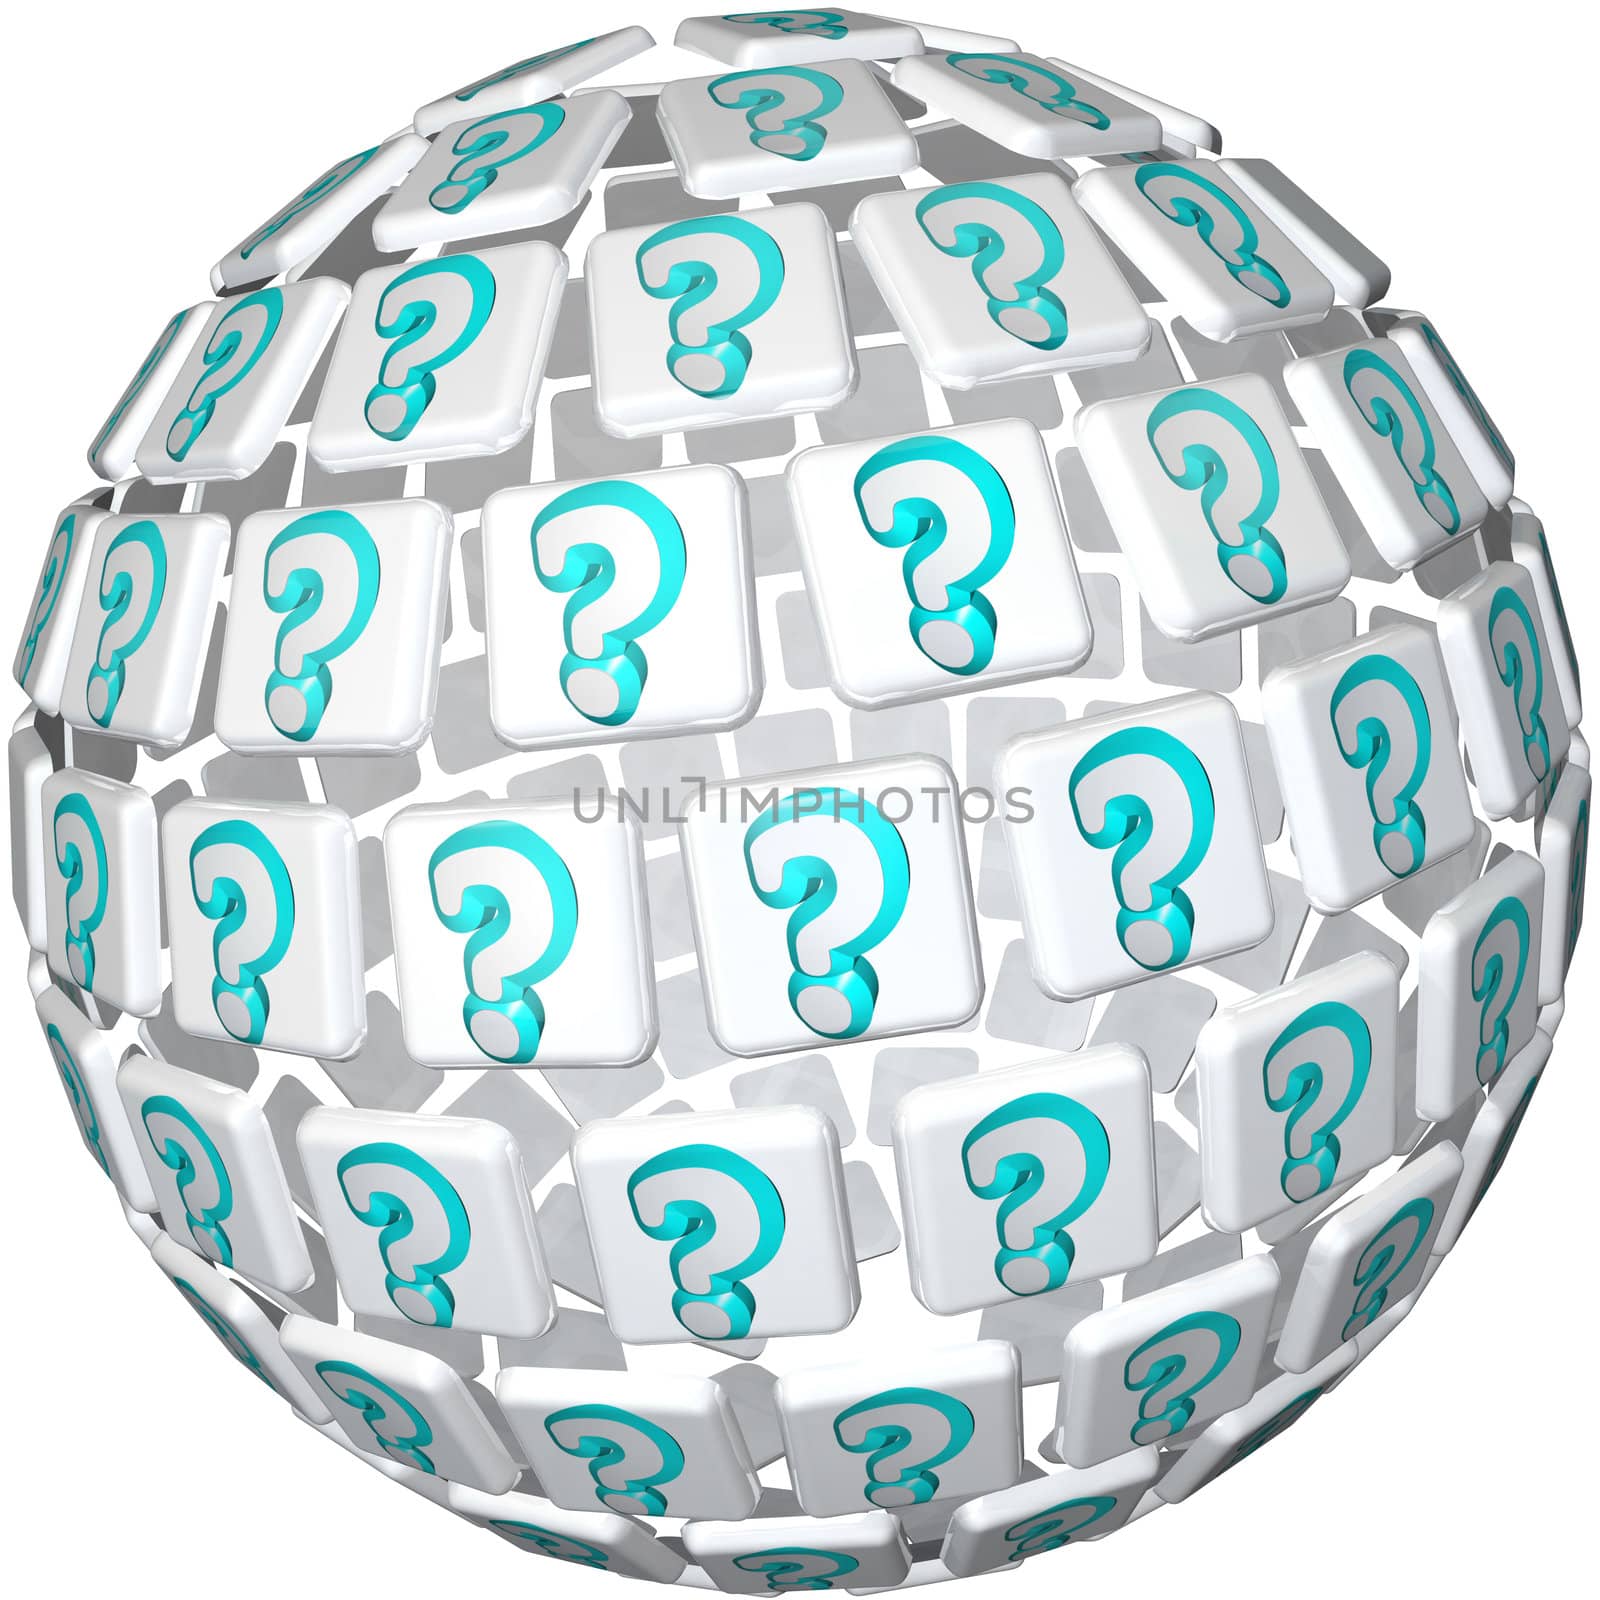 A sphere made up of tiles featuring question marks symbolizing a world of confusion or curiosity and the hunt for answers to life's most confounding questions